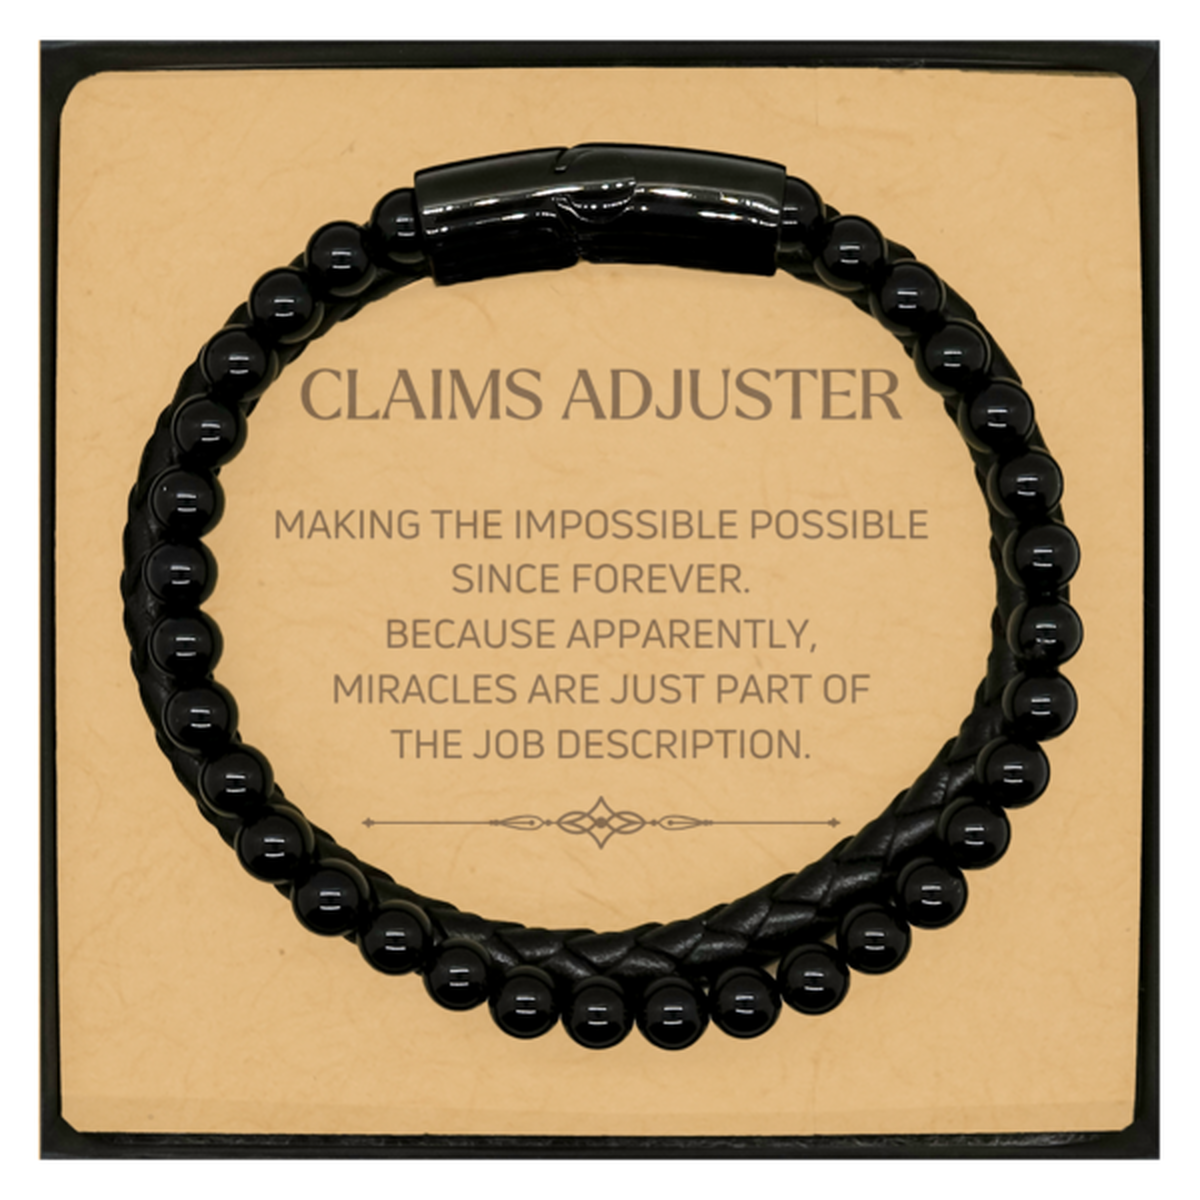 Funny Claims Adjuster Gifts, Miracles are just part of the job description, Inspirational Birthday Christmas Stone Leather Bracelets For Claims Adjuster, Men, Women, Coworkers, Friends, Boss